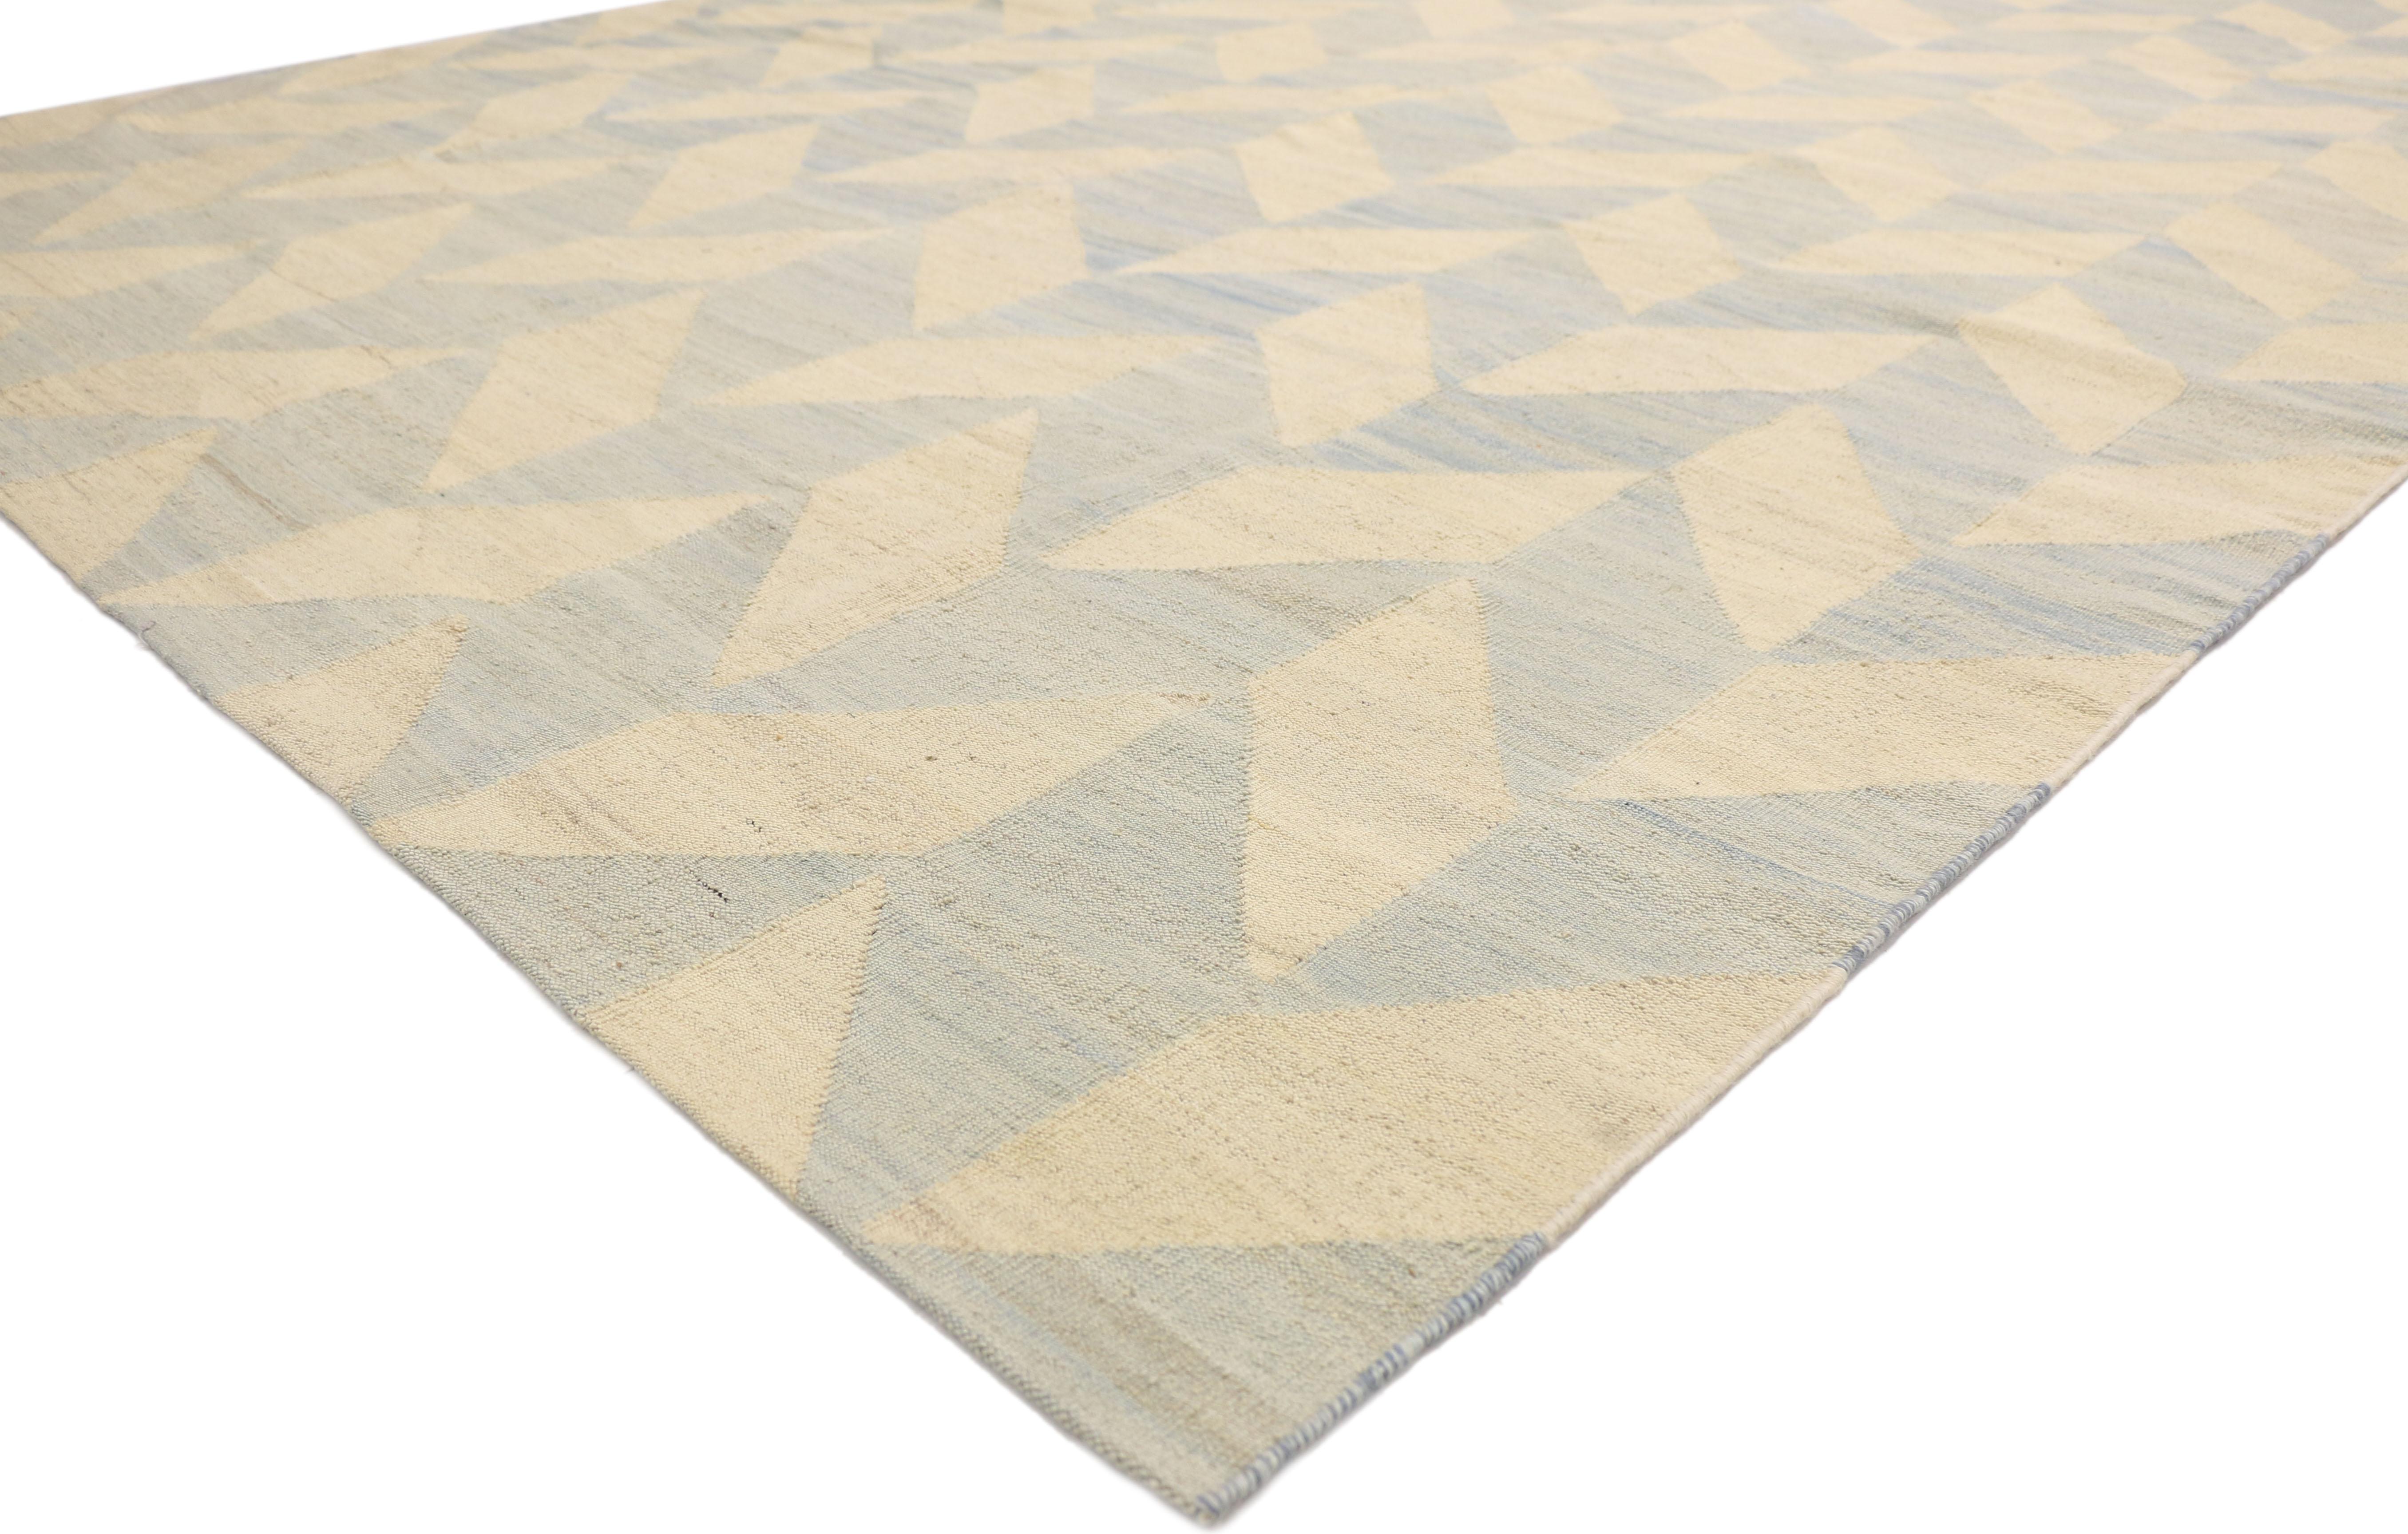 80095, vintage Afghan Kilim area rug with Herringbone pattern and coastal living style. This handwoven wool vintage Kilim area rug features a Classic Herringbone pattern and coastal style in a subtle color palette. The flat-weave Kilim rug displays